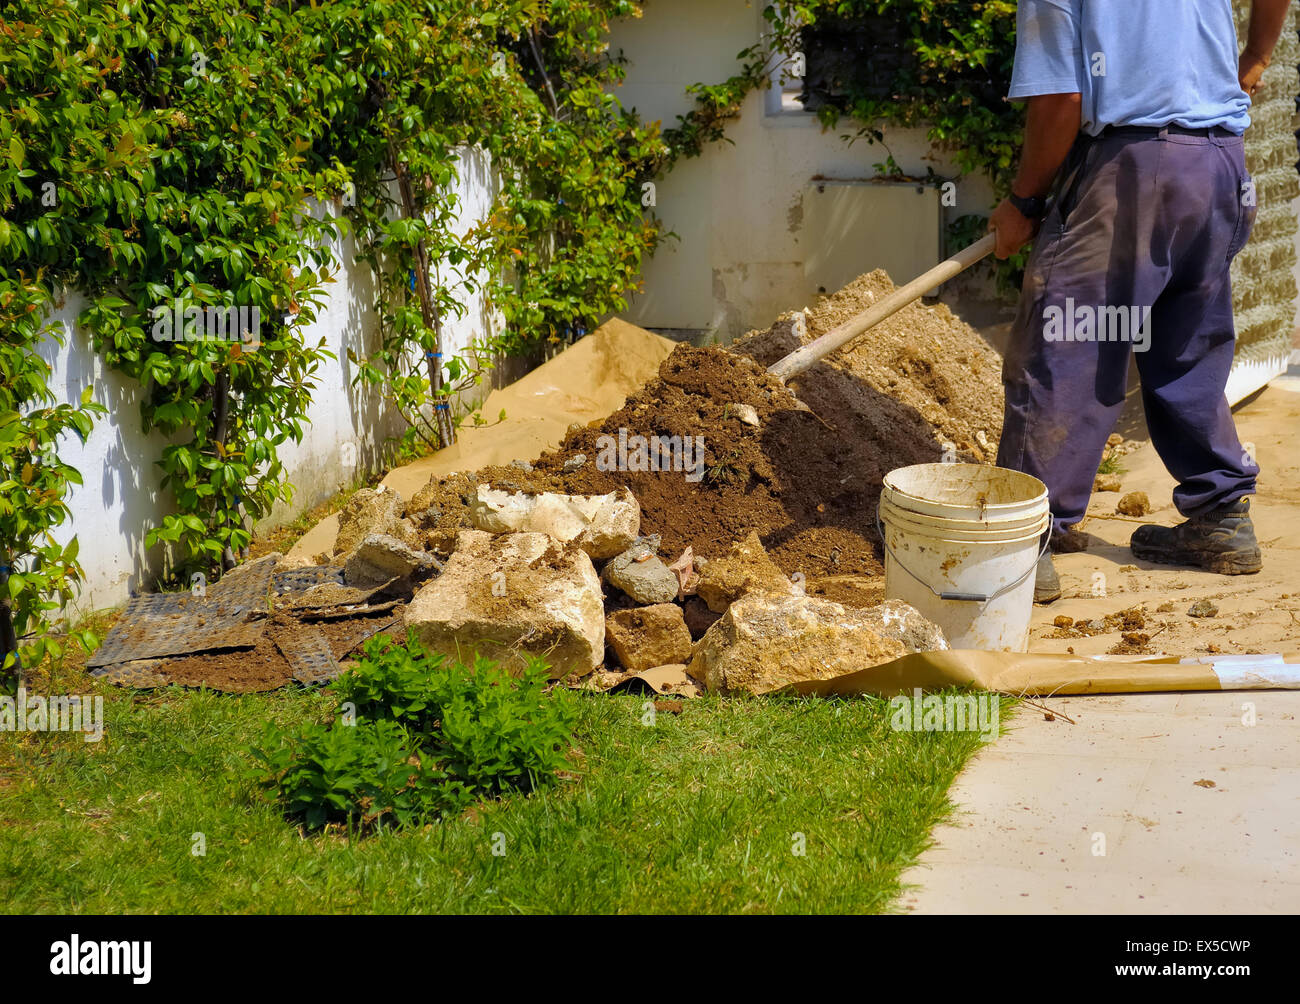 Gardener digging over soil in an garden with a stainless steel garden spade, with a mound of soil on the blade of the spade. Stock Photo